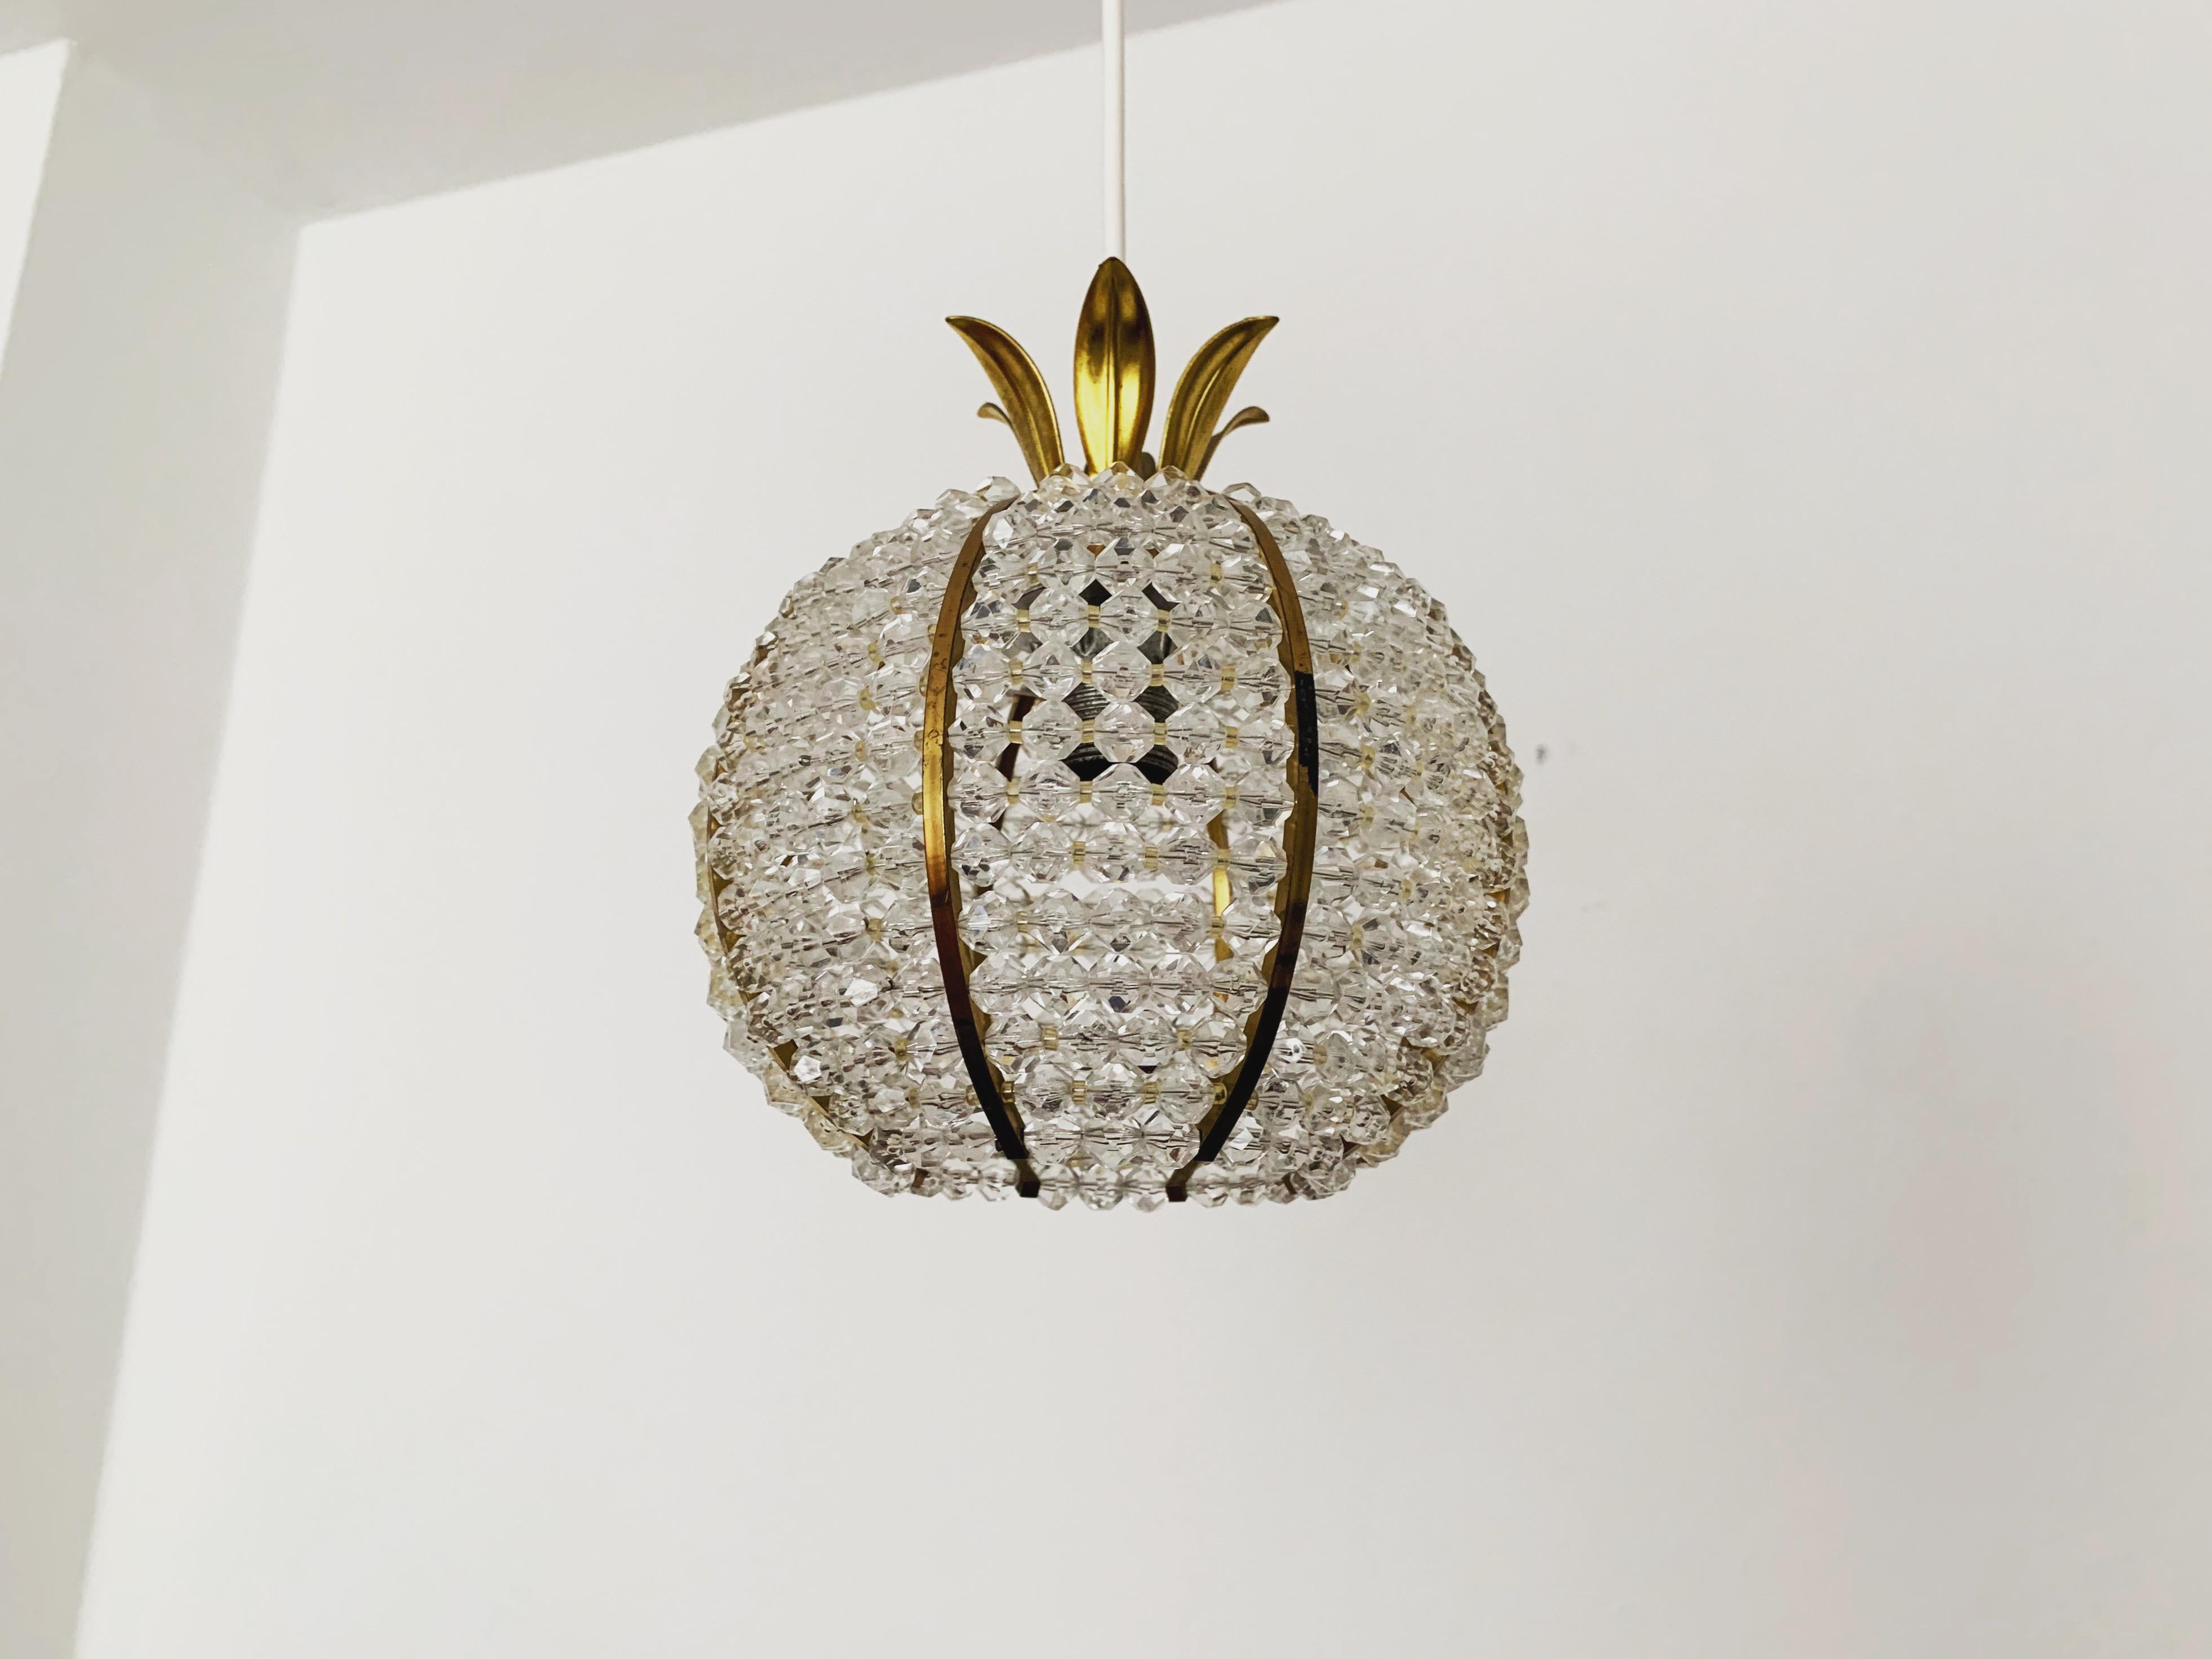 Wonderful little pendant lamp from the 1960s.
The lamp with its lavishly equipped Plexiglas balls and the brass details has a very luxurious look and sparkles particularly beautifully.
The design and the materials used create a great glittering